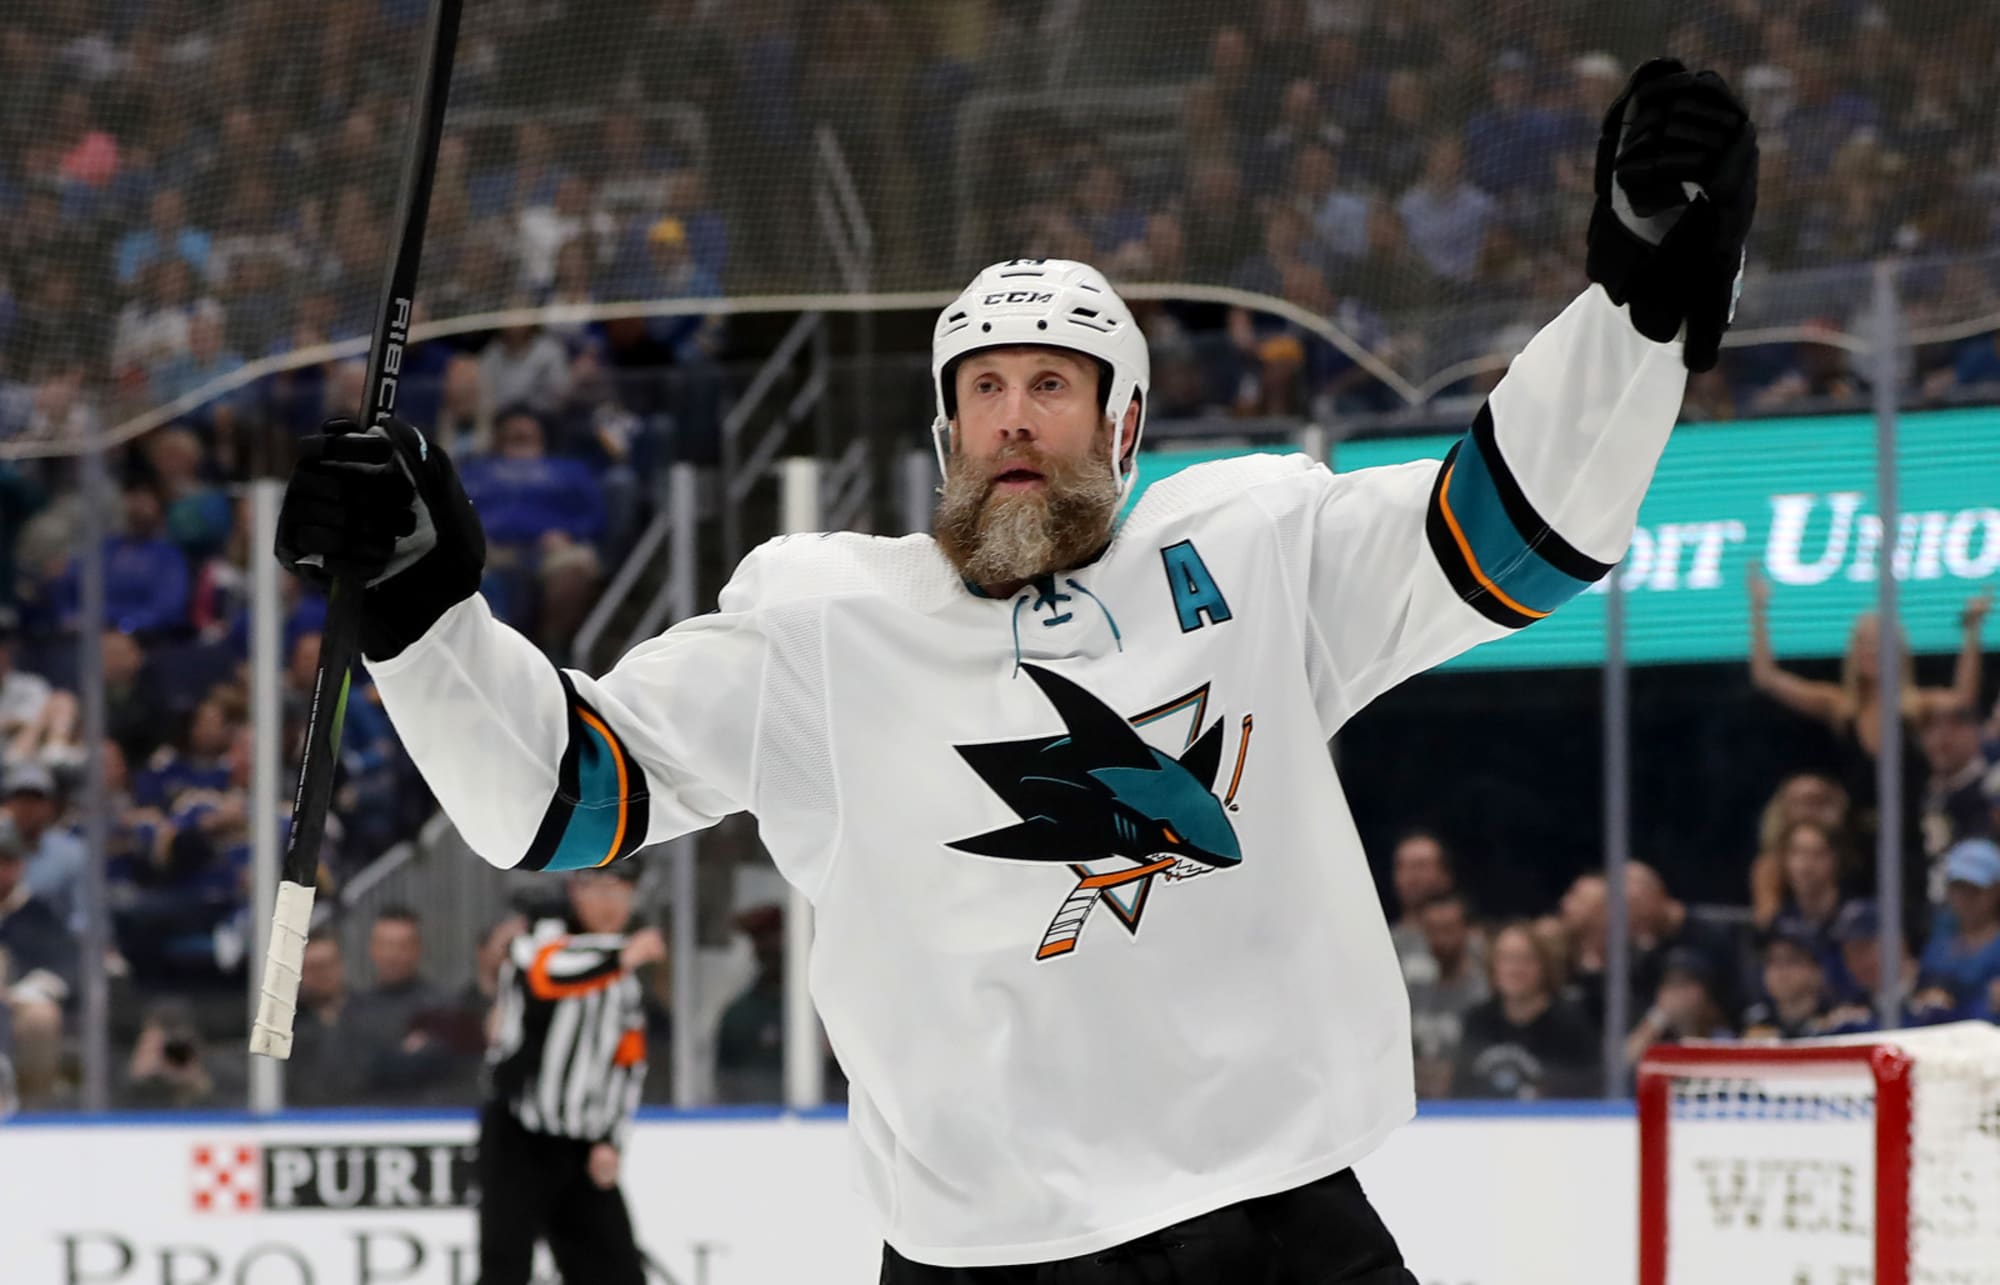 Joe Thornton in Maple Leafs gear is going to take some getting used to